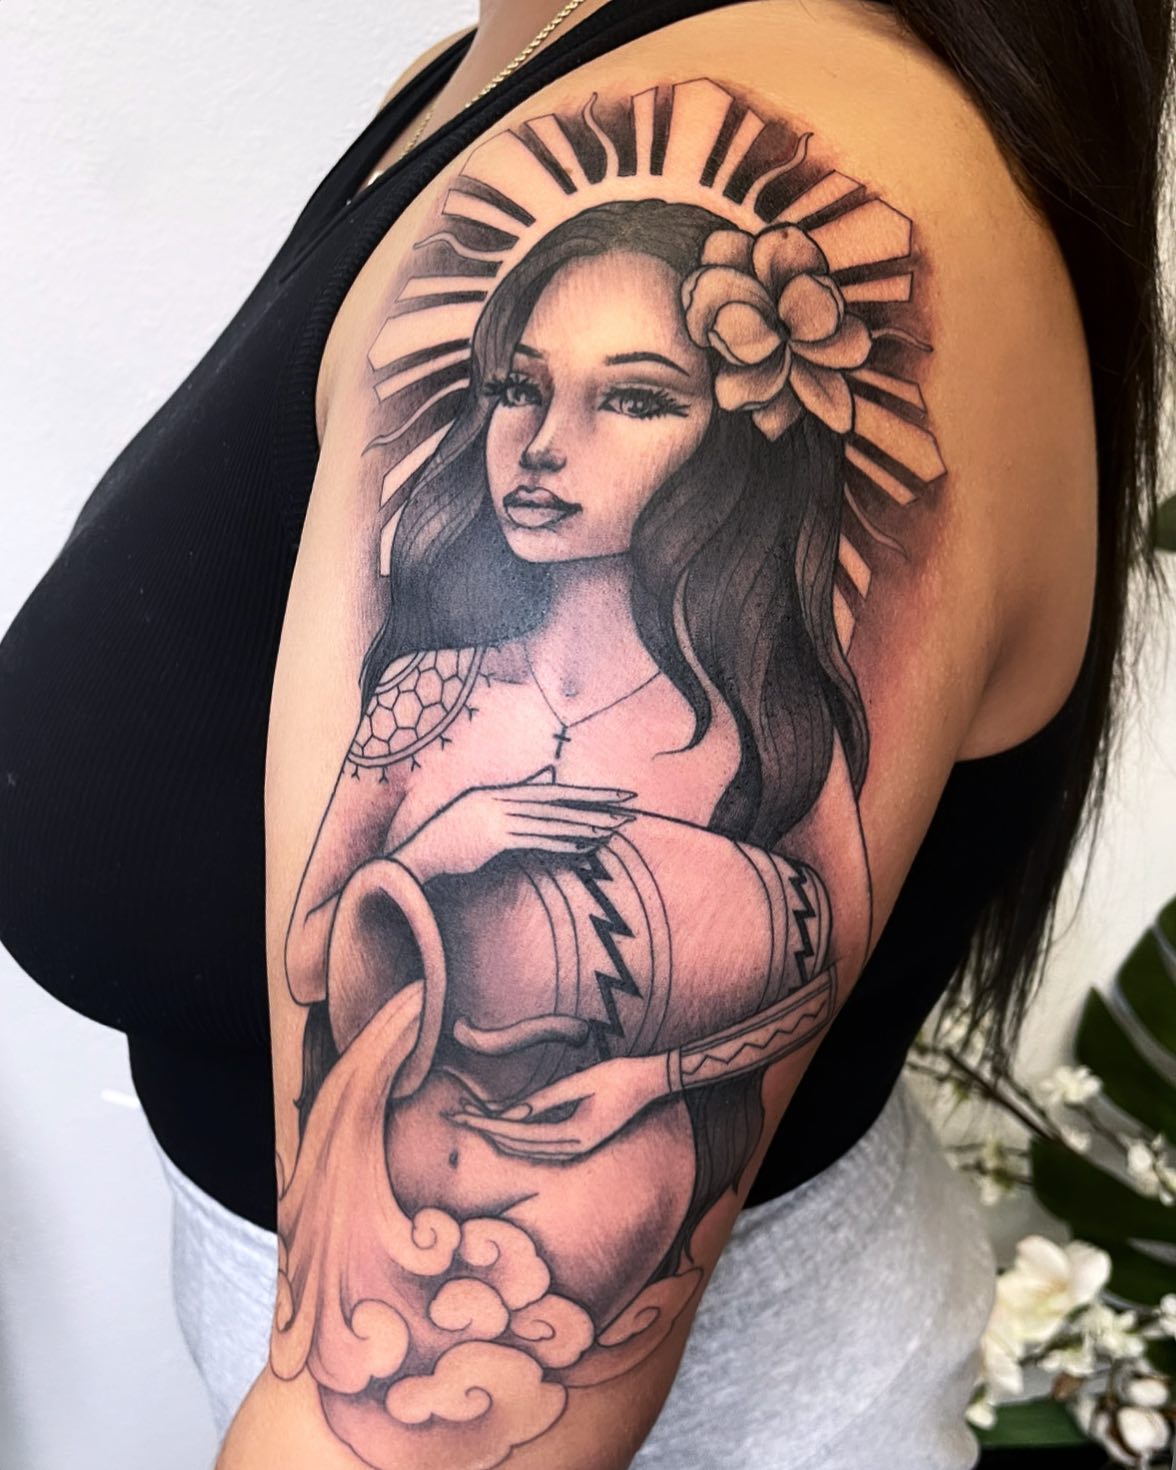 Cover tattoos look amazing if they are done on sleeve, especially starting from your shoulder. A beautiful and holy girl holding water in her hands offers a look that is so unique. This Aquarius girl is wearing a cross necklace but you can change the sign according to your own religion, of course.